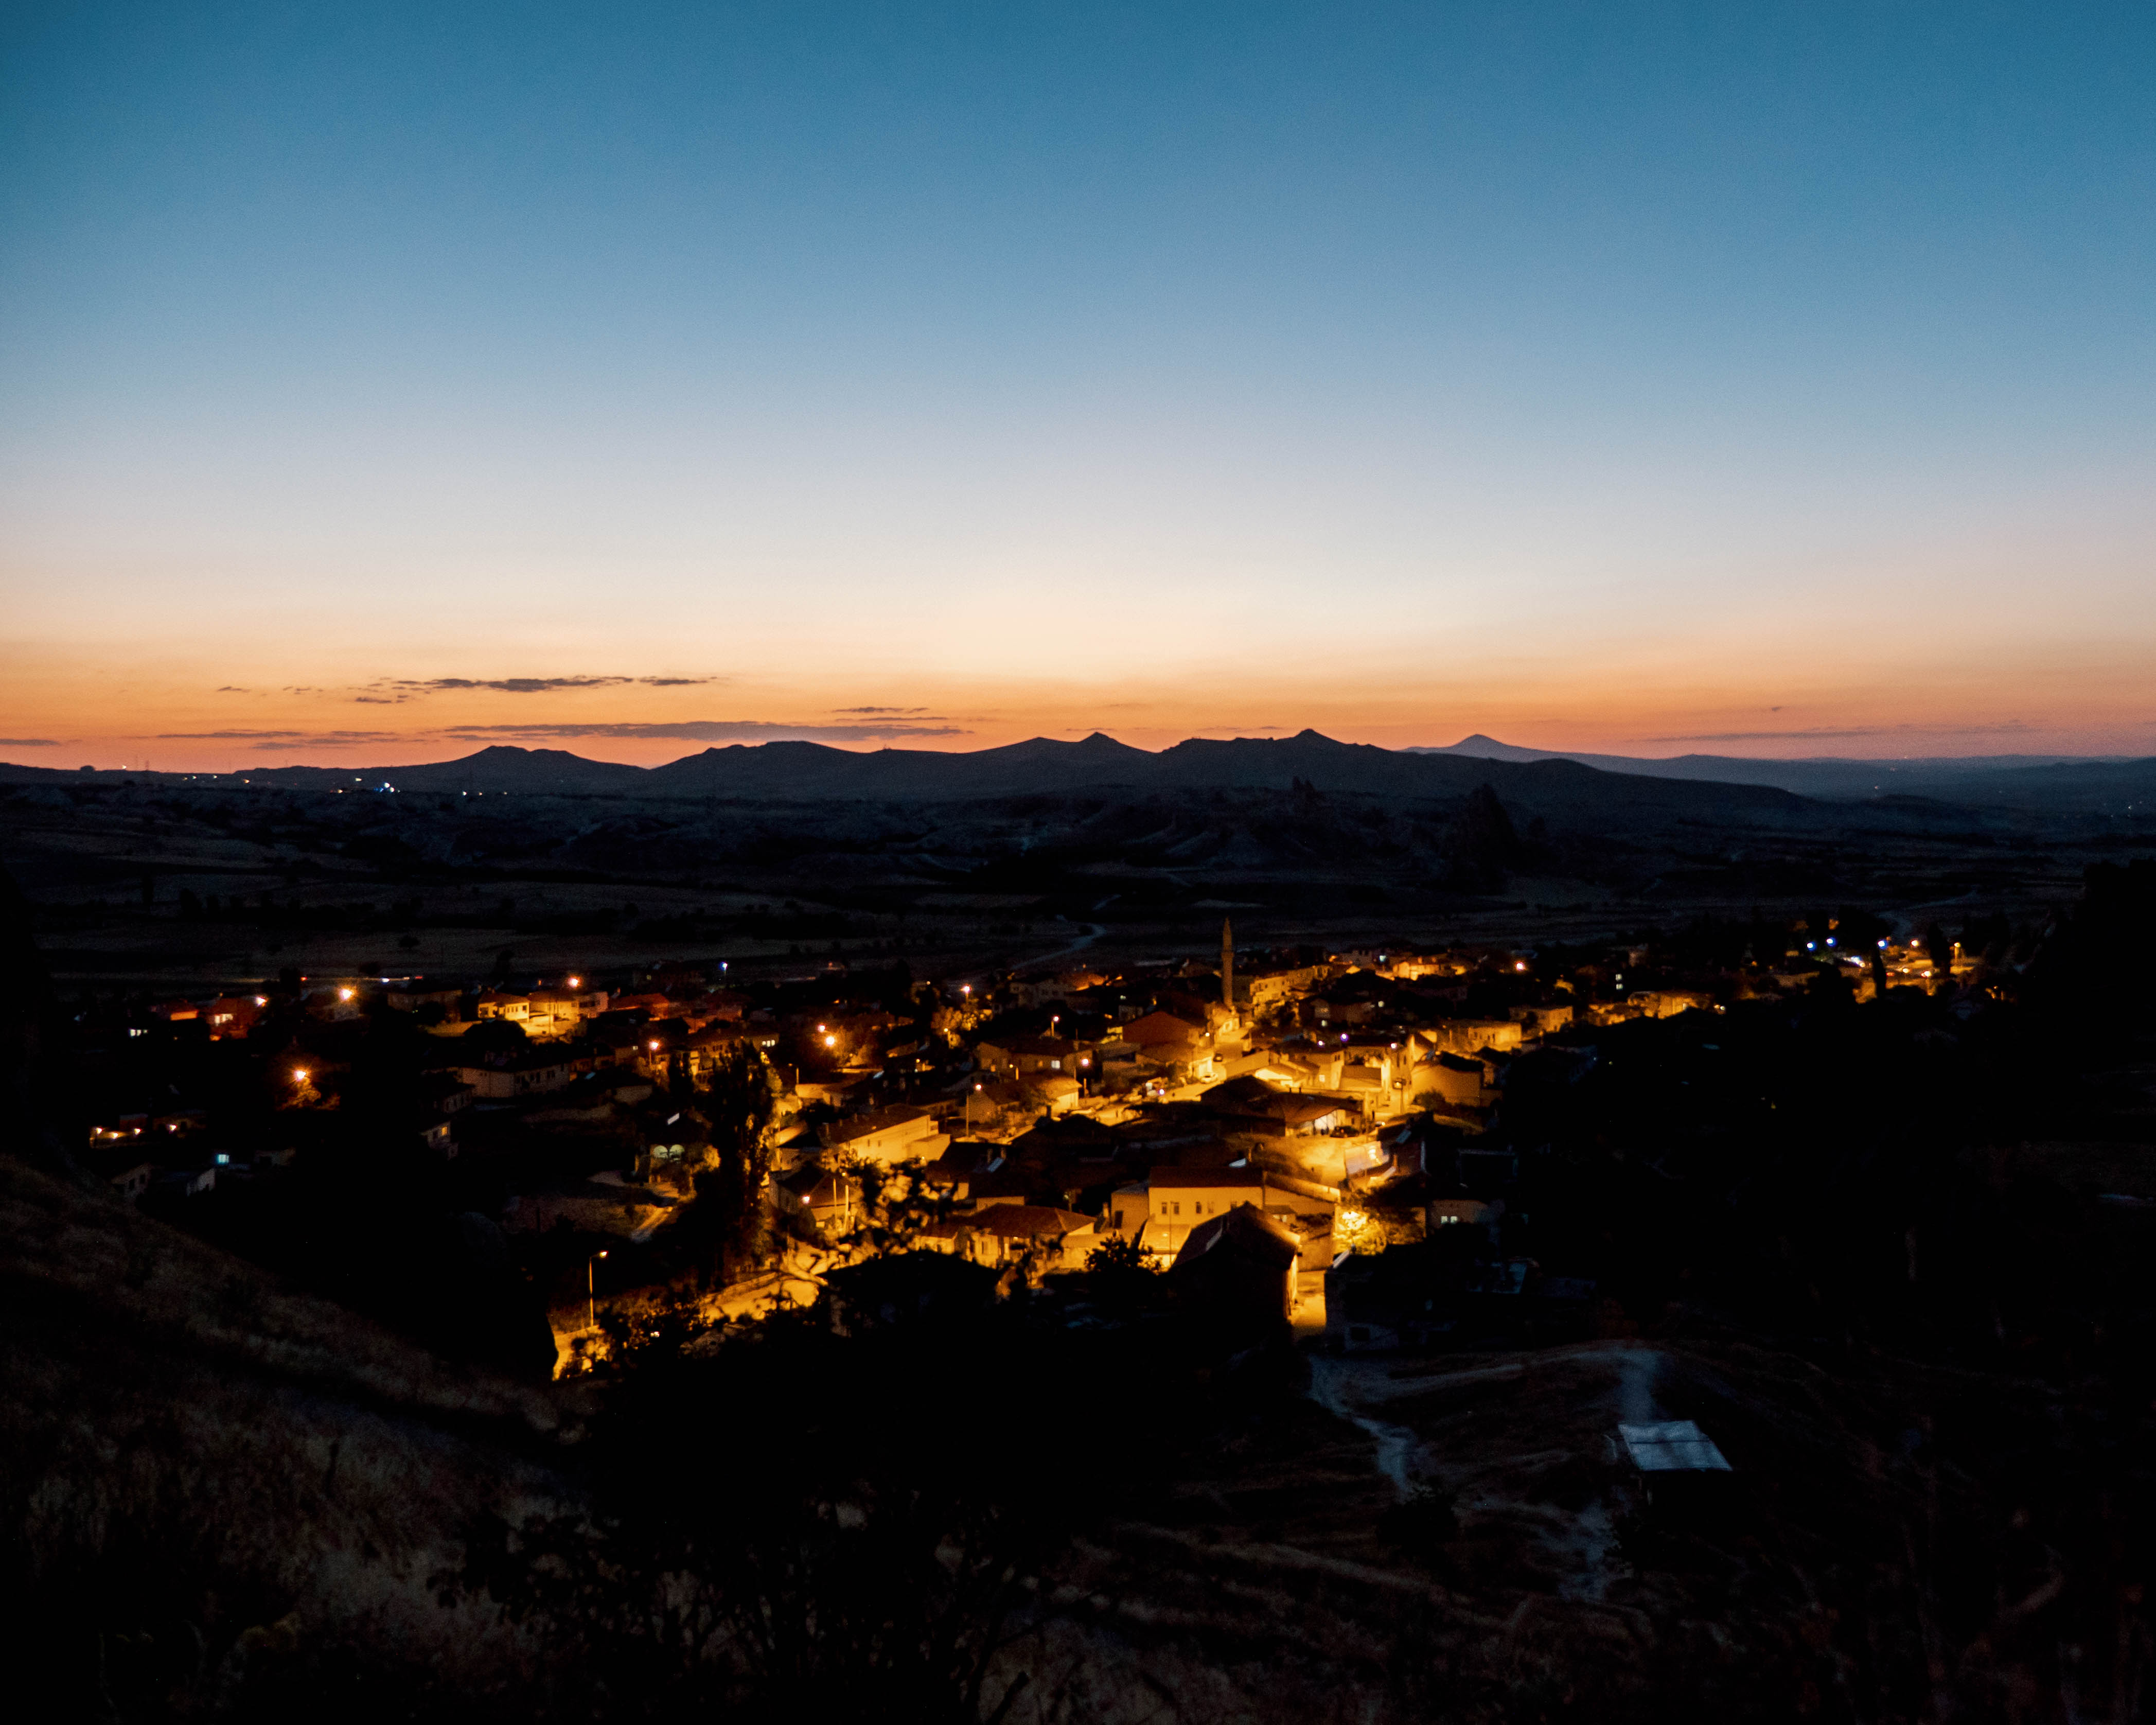 When the sun sets, village lights under the hills of Cappadocia turns on and creates a warm contrast to its surroundings.